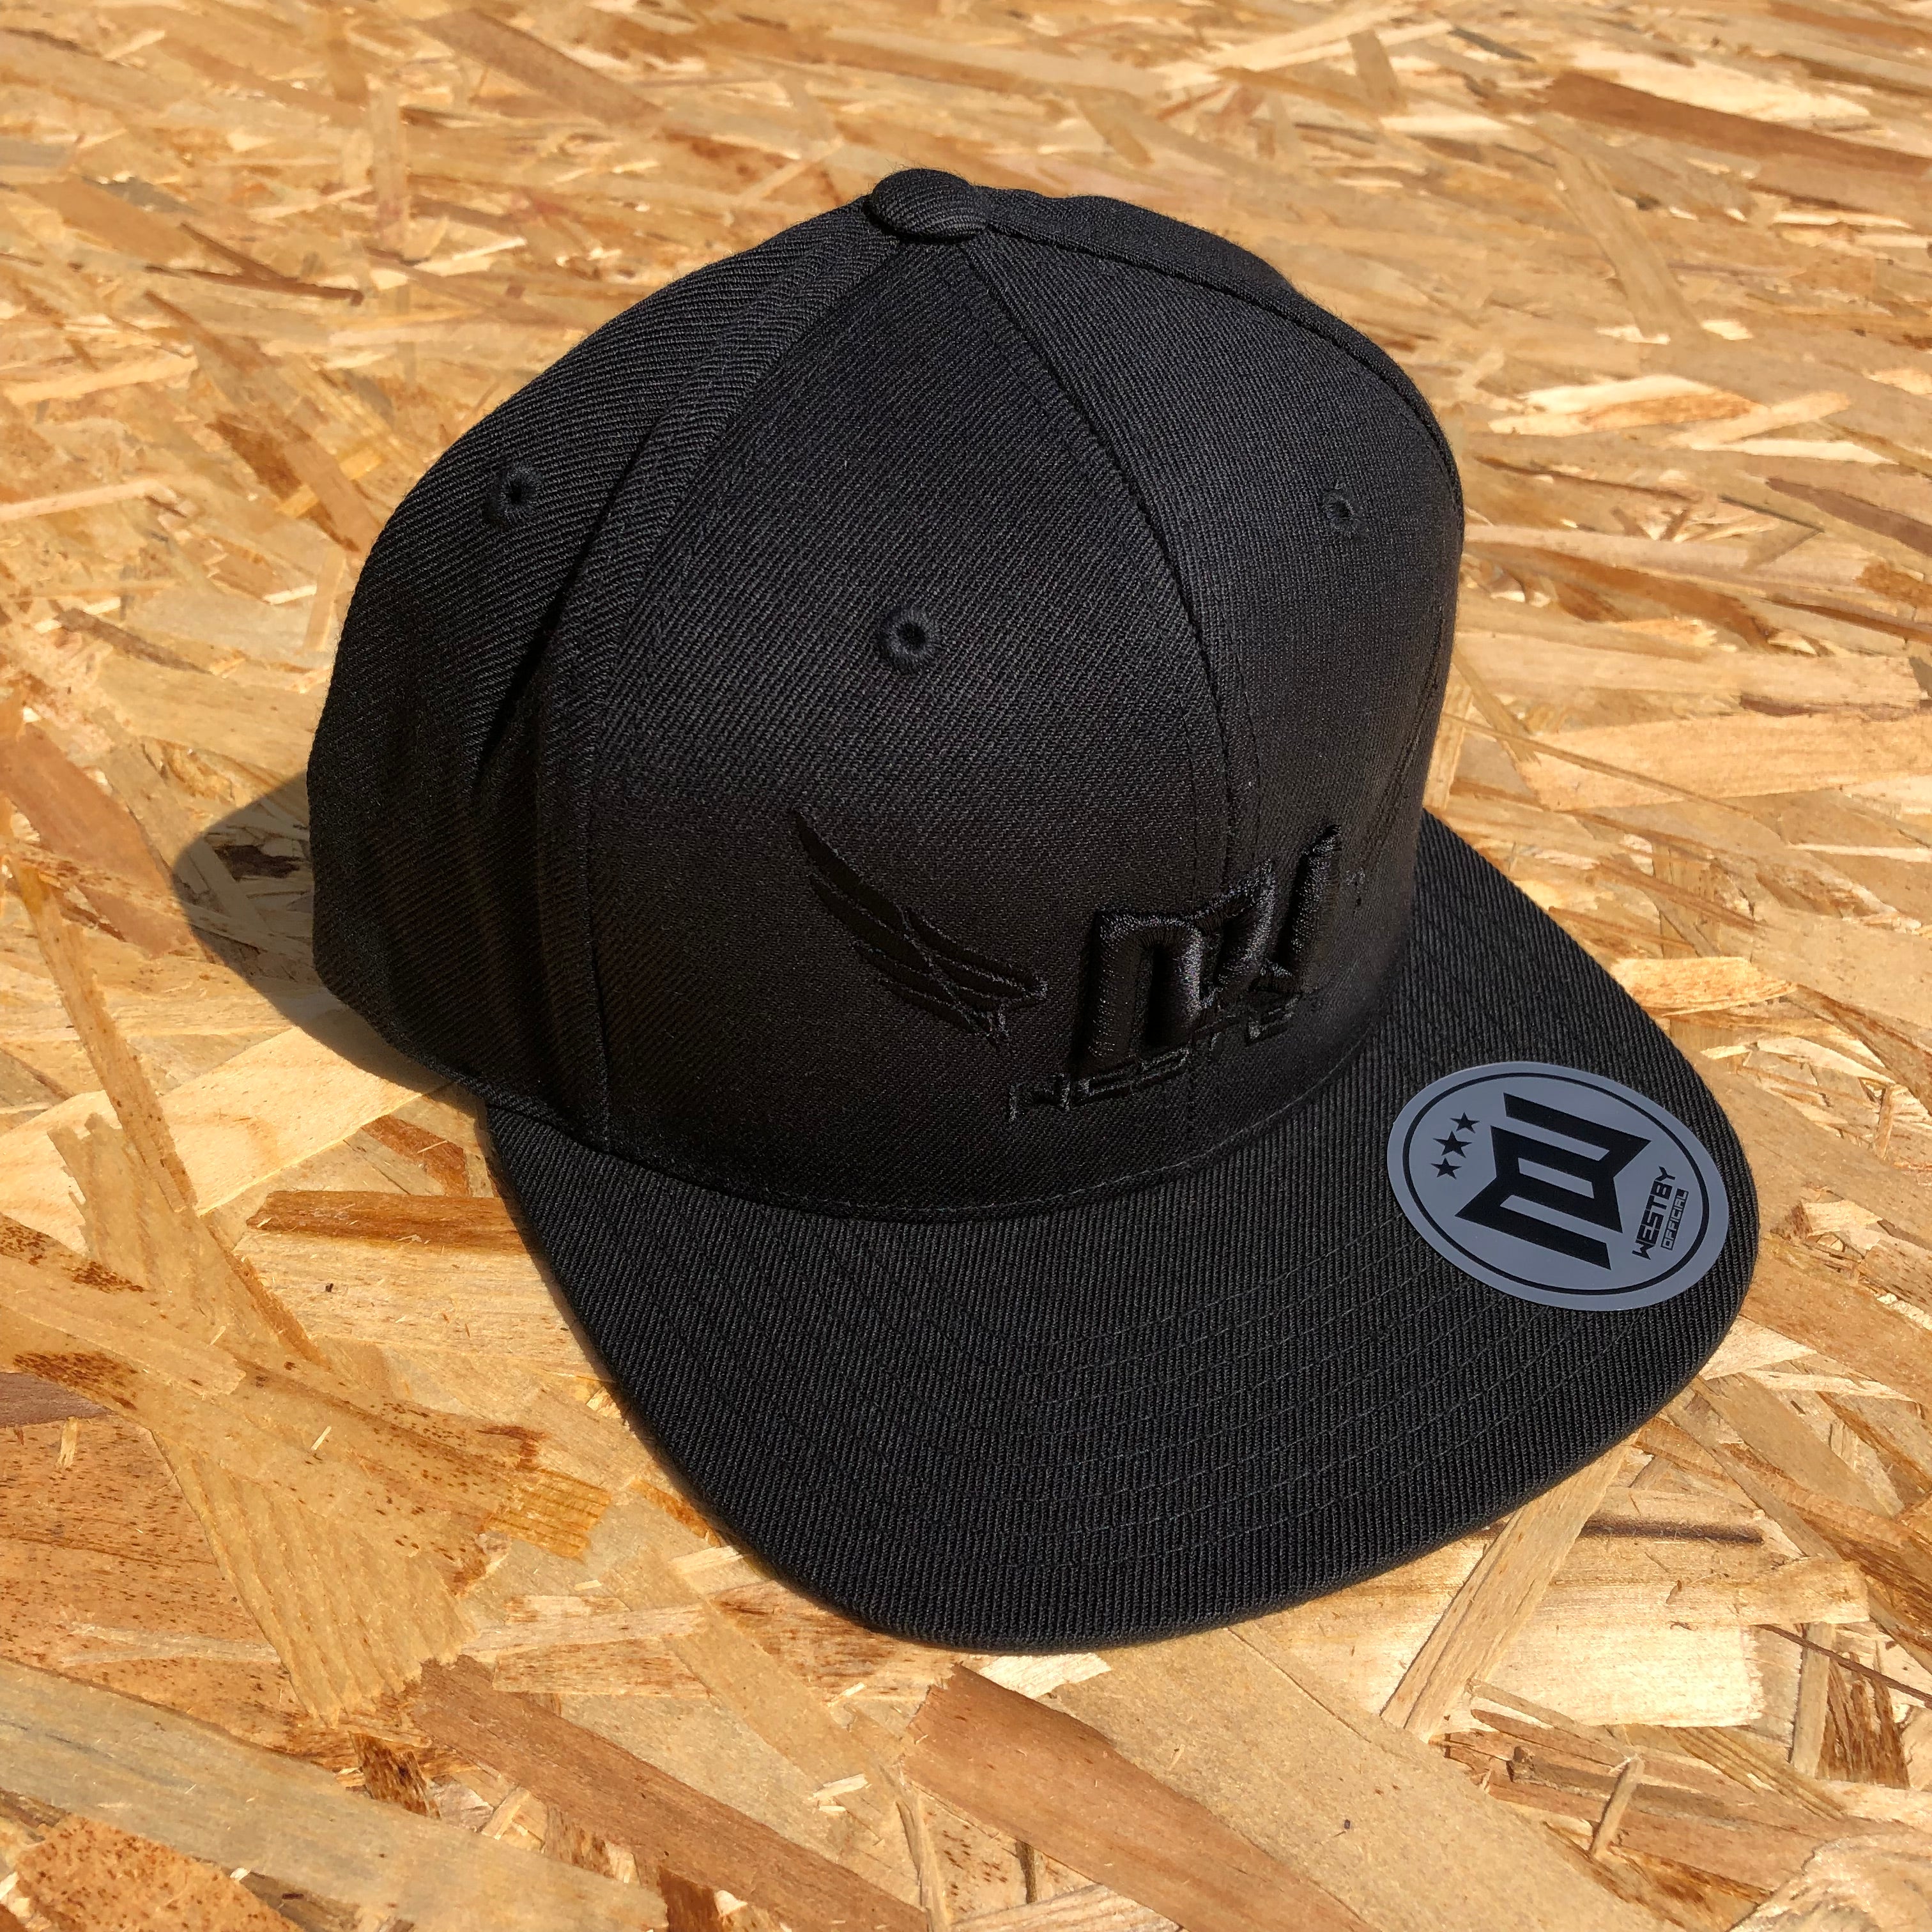 Michelle Westby All Black Snapback Cap